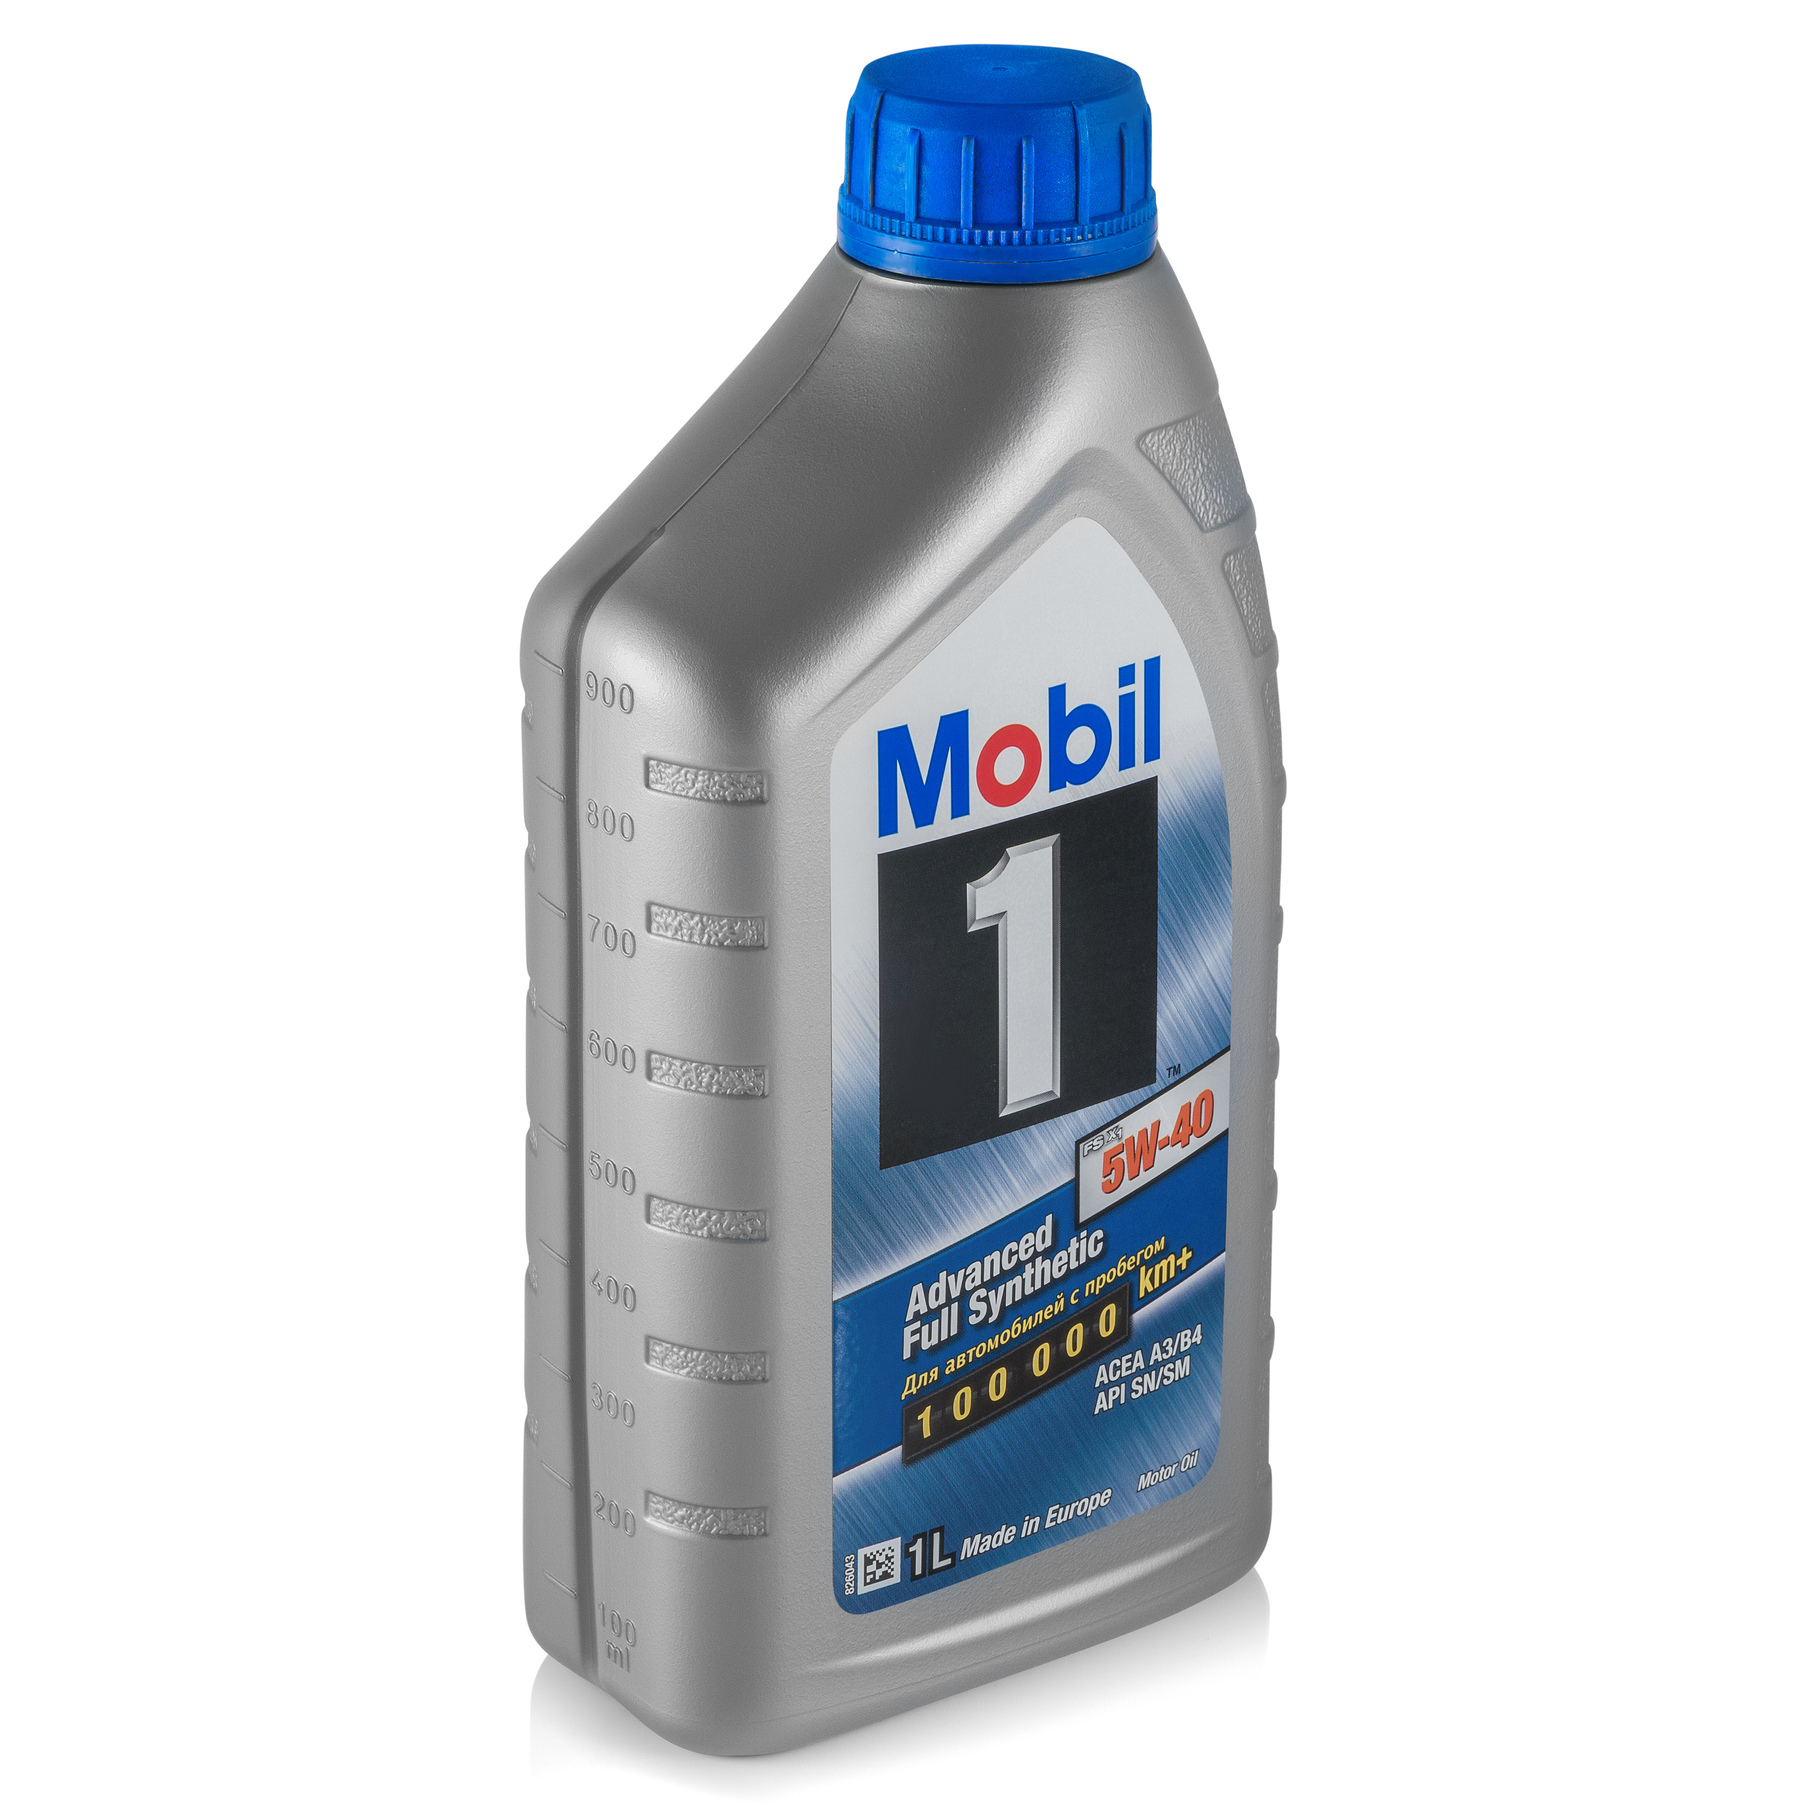 Engine oil Mobil 1 Full Synthetic 5W-40, 1L Mobil 153266